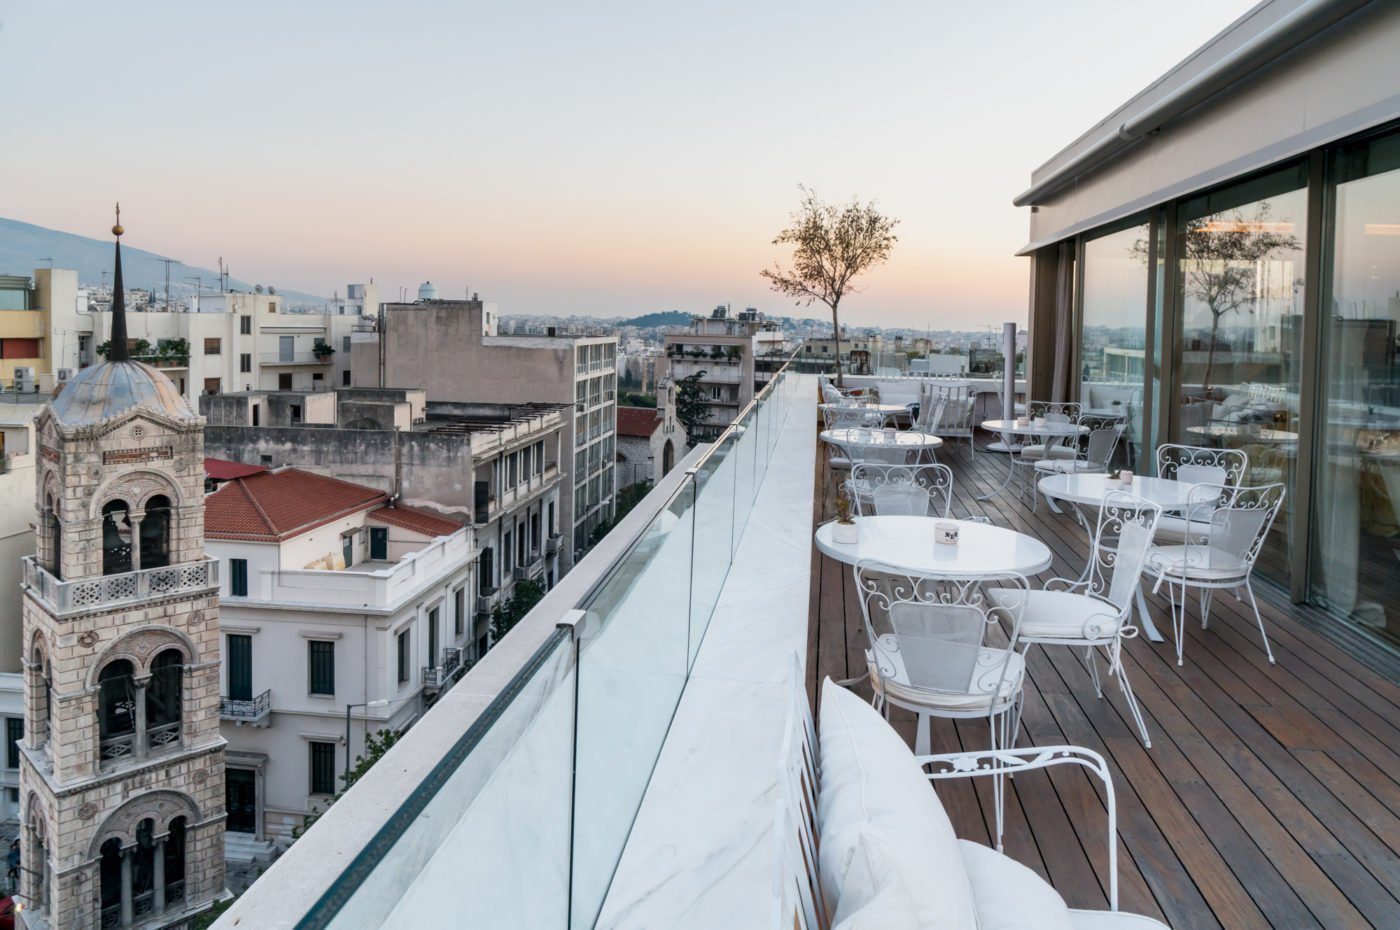 Art Lounge, the rooftop bar of New Hotel in Athens